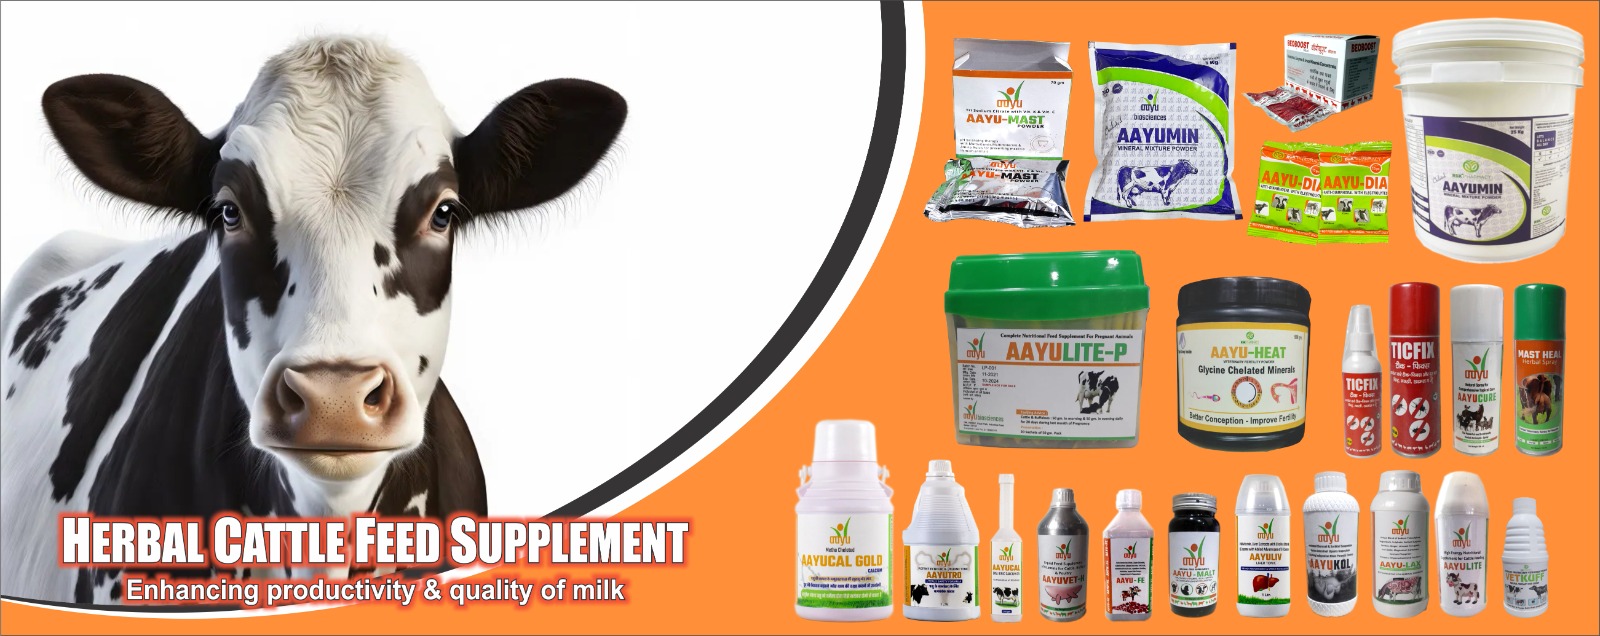 Veterinary Herbal Medicine Manufacturing Companies Of in india